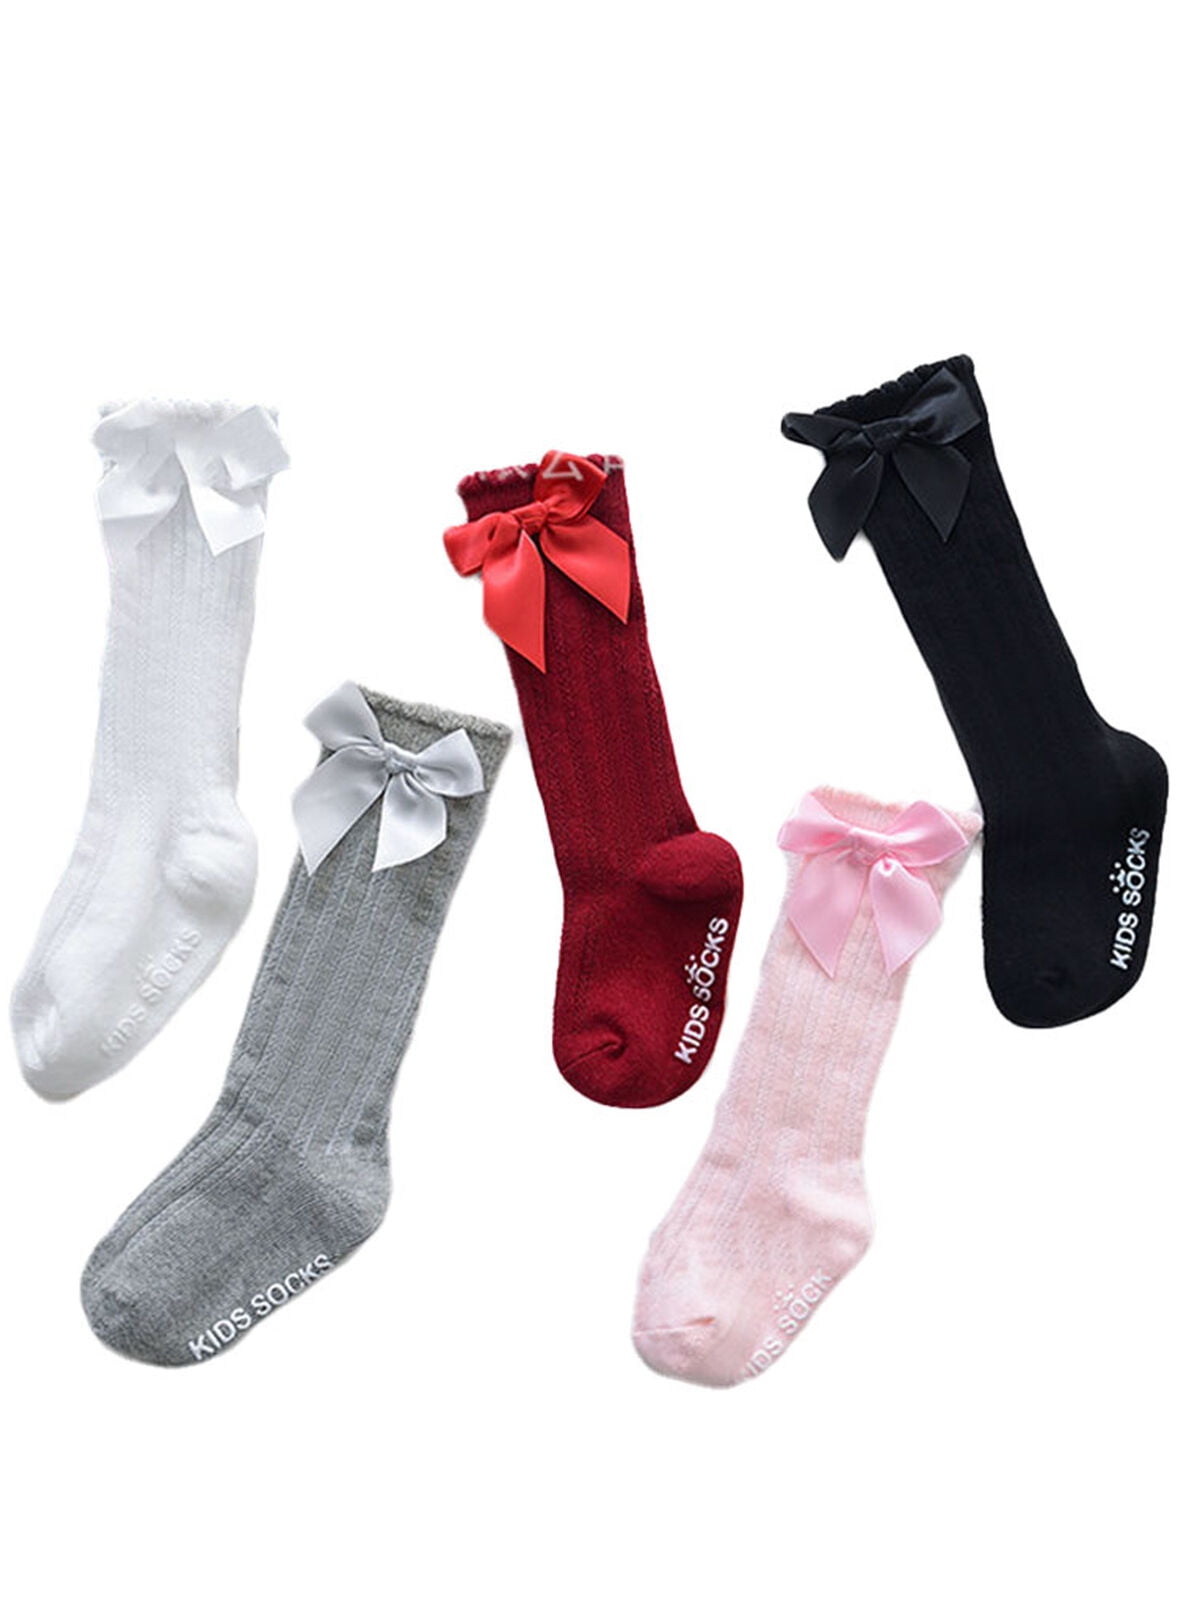 5 Pairs of Girls Knee High School Socks with Matching Silky Ribbon Bow 8 Colours 